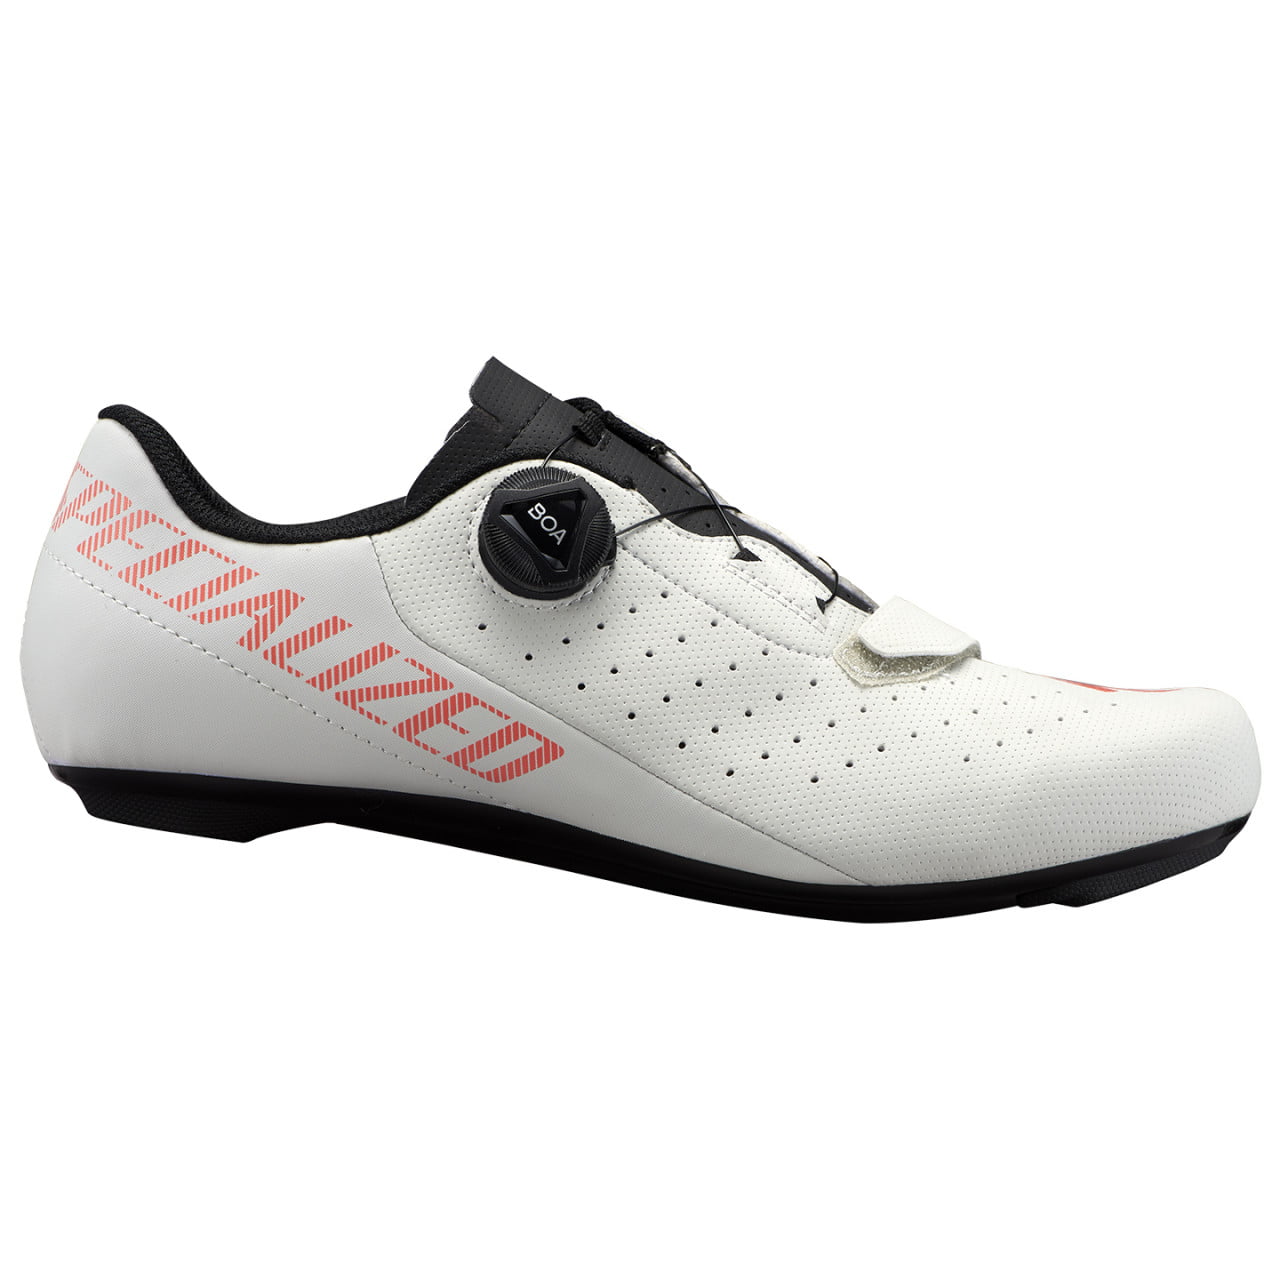 Torch 1.0 Road Bike Shoes